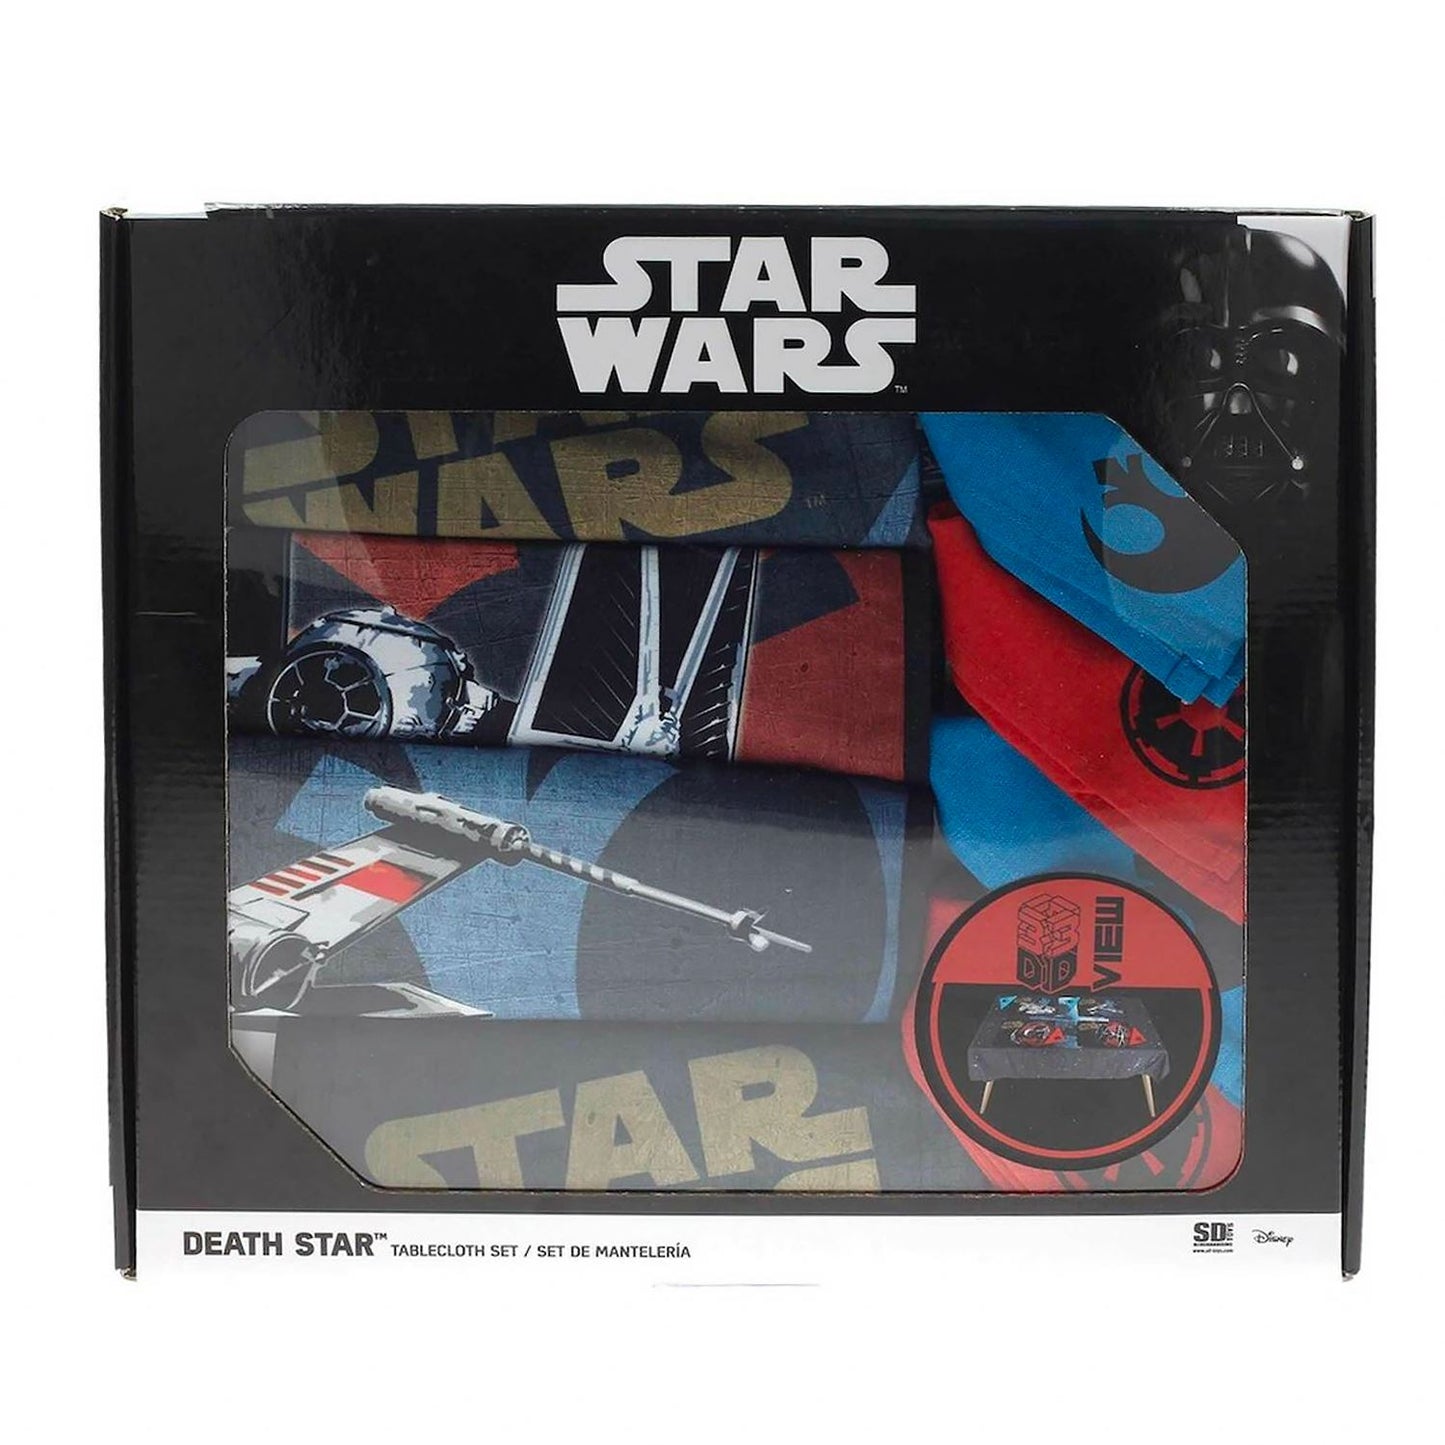 Star Wars DEATH STAR TABLECLOTH SET + 4 Placemats + 4 Napkins (SD Toys)